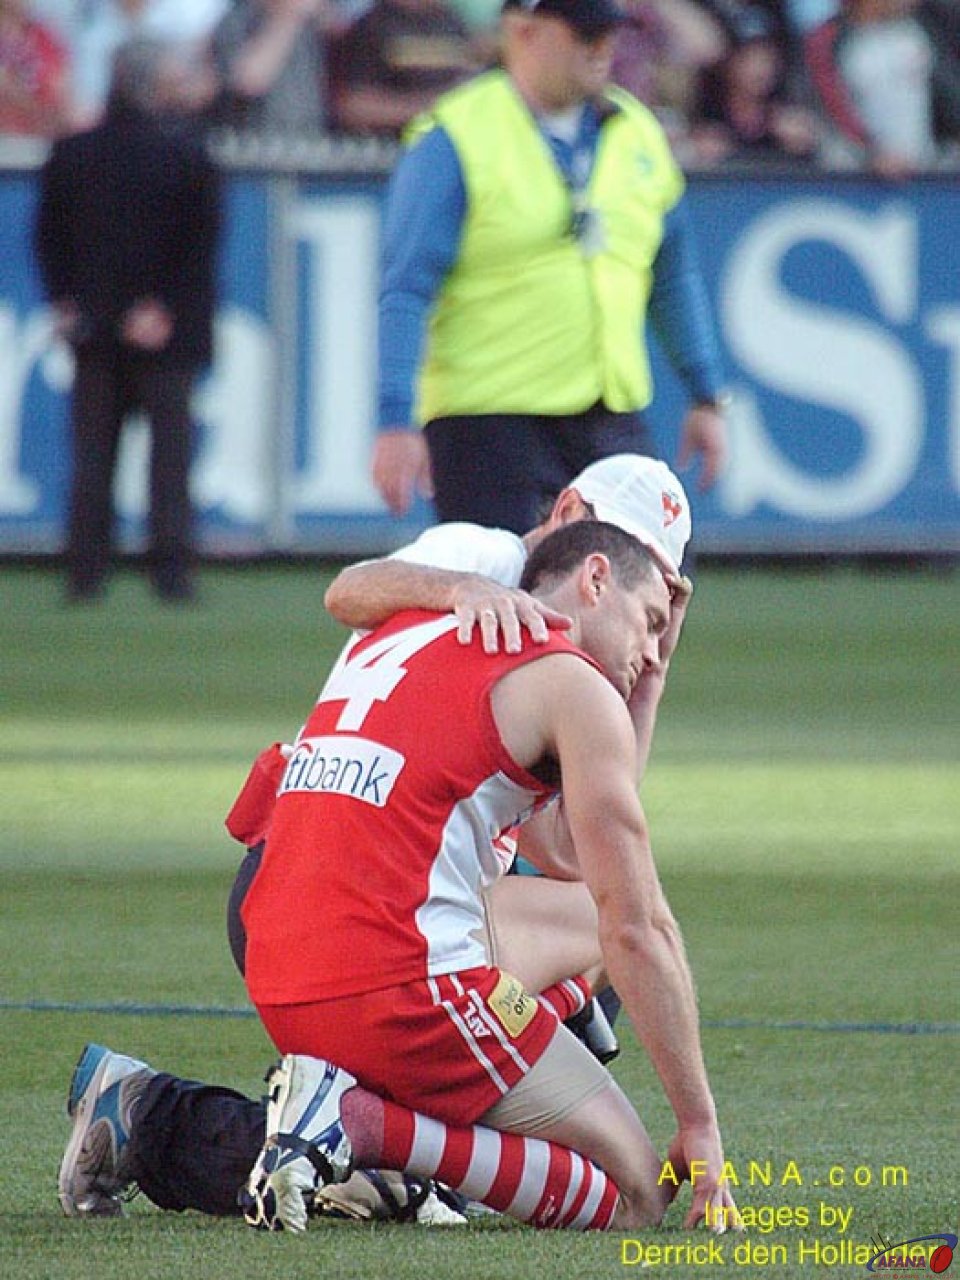 [b]The season ends abruptly in a thriller, the emotion showing on Swans players and staff[/b]